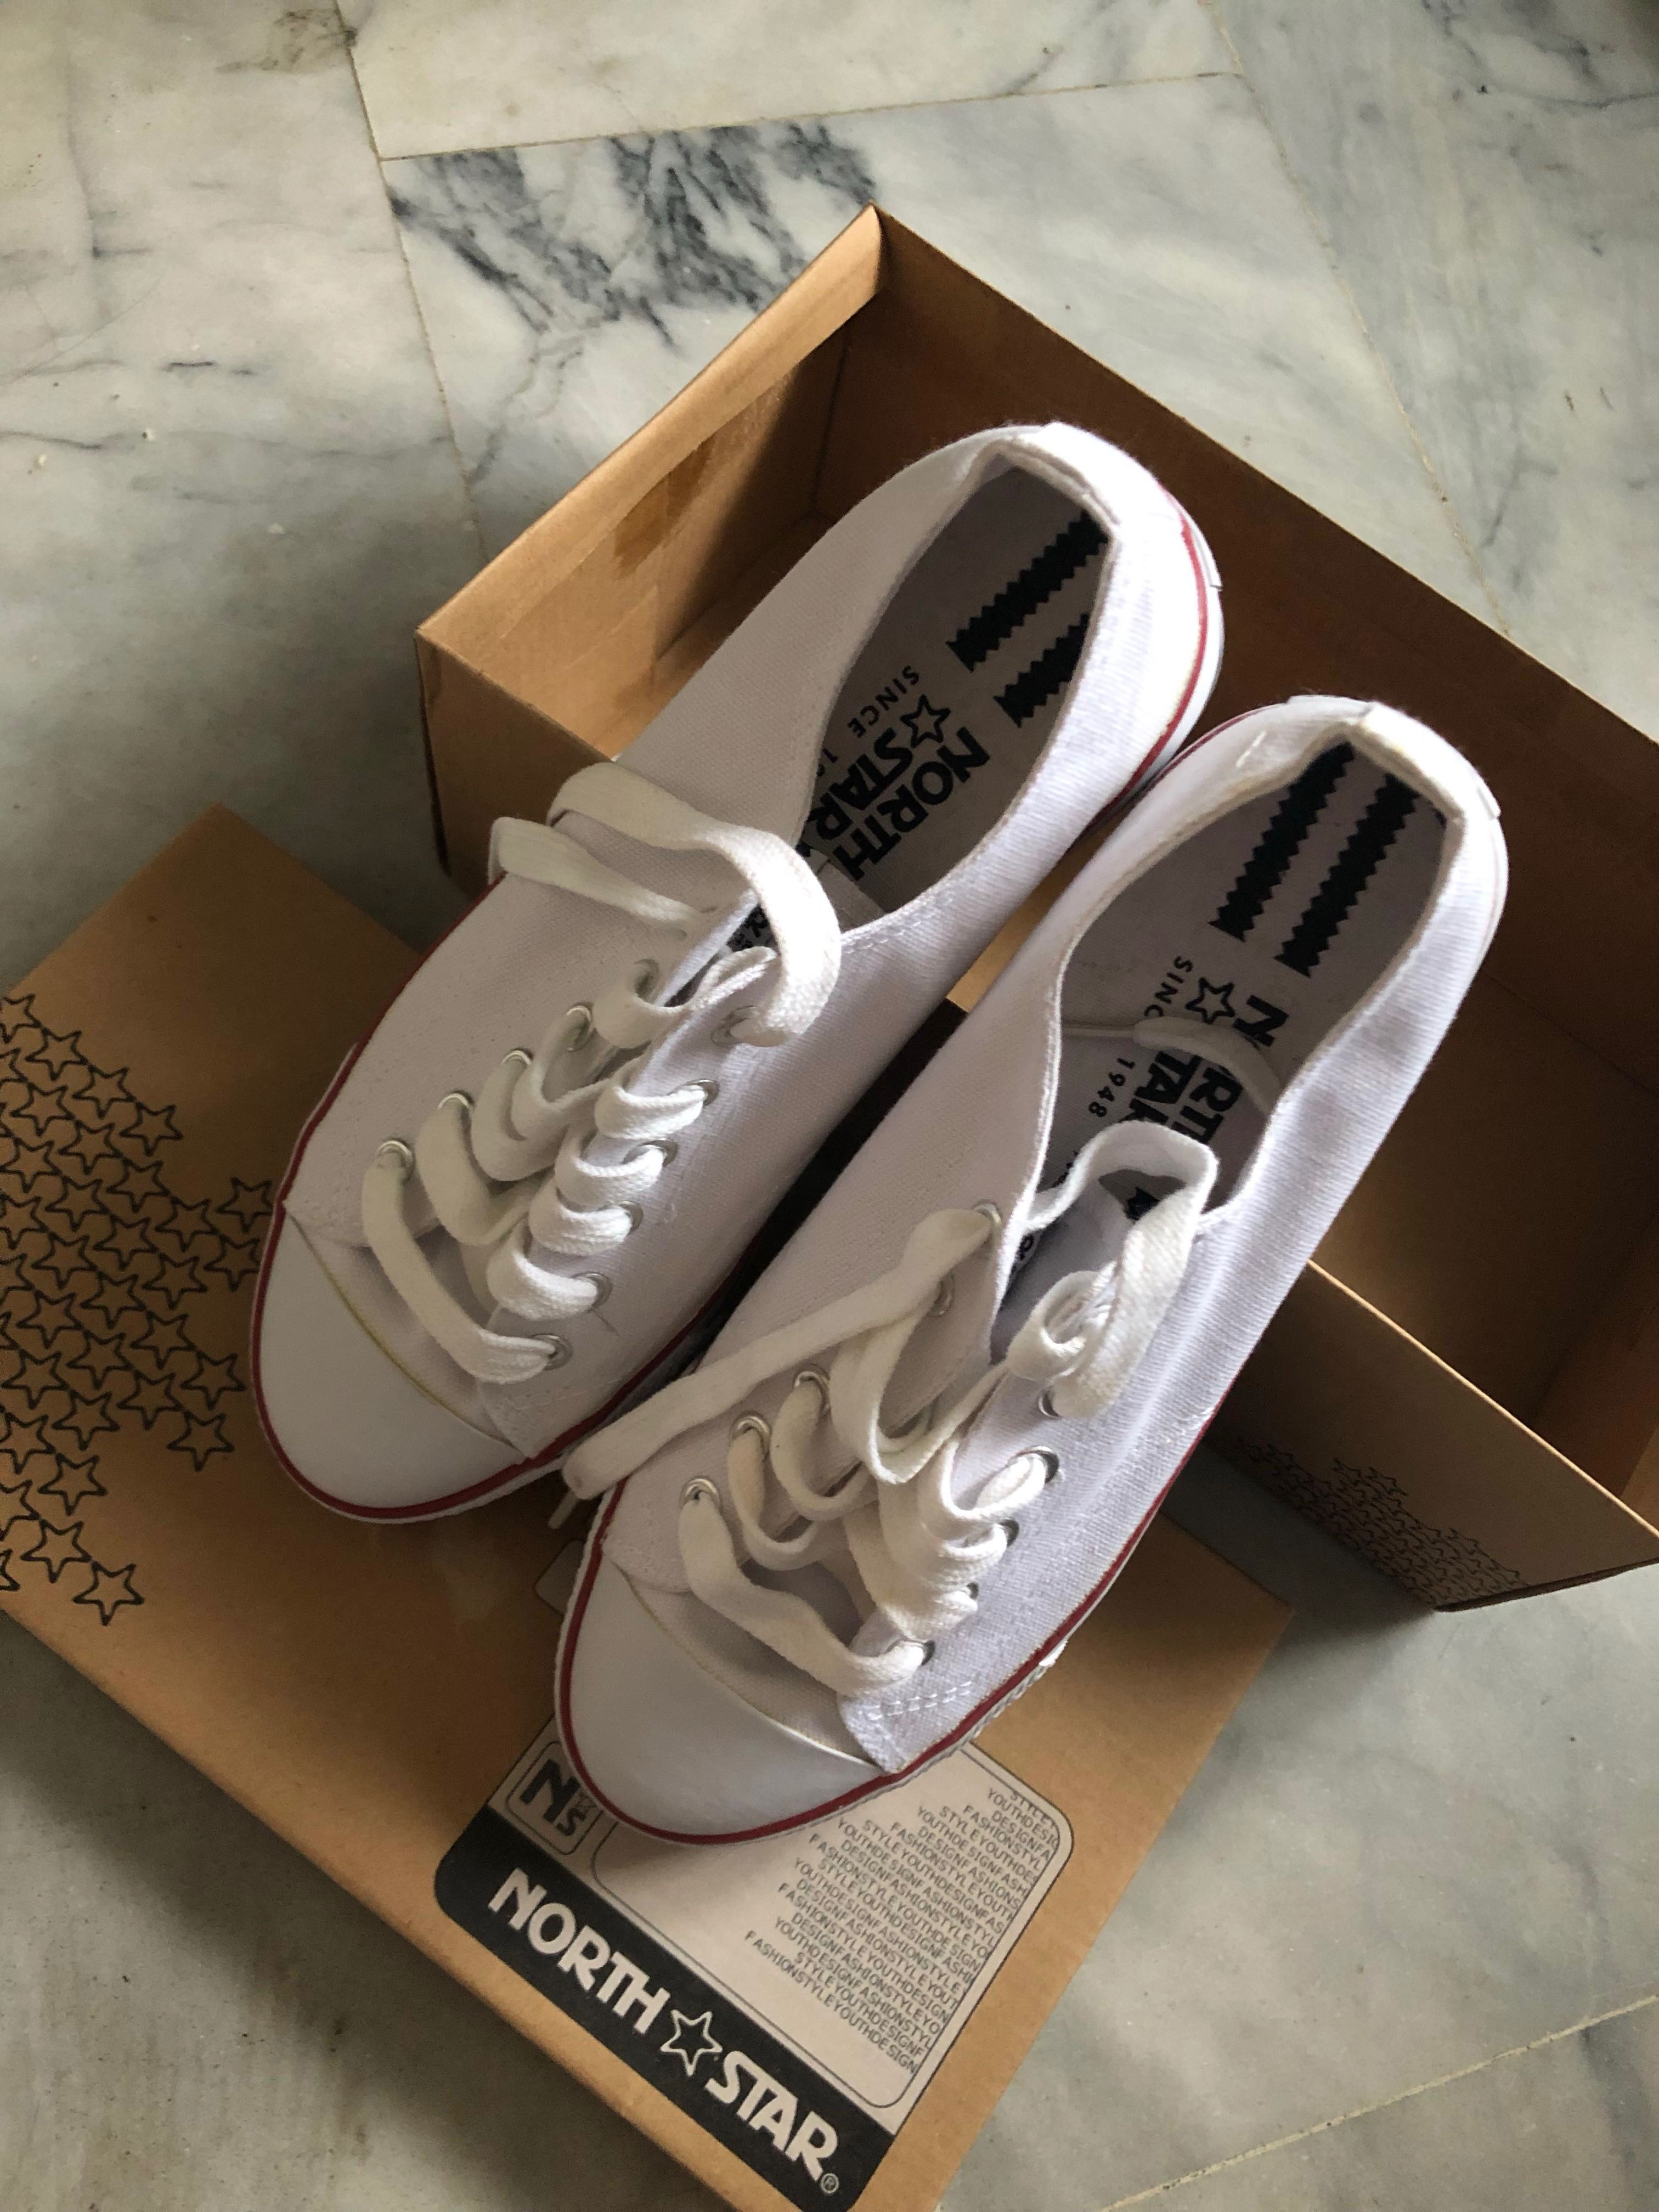 Reduced) NORTH STAR white canvas shoes 